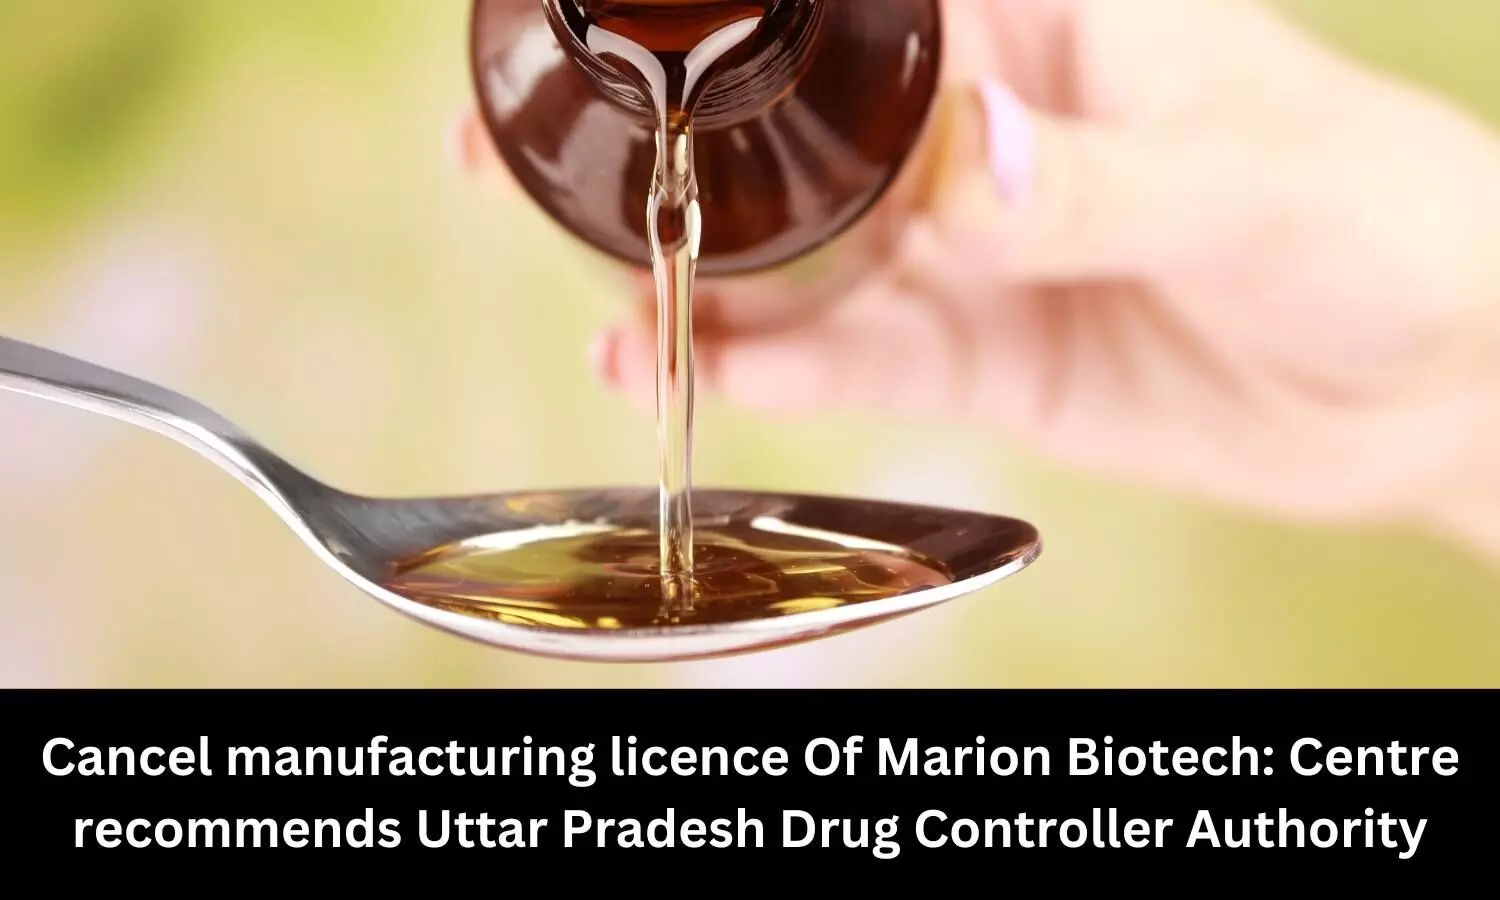 Centre recommends UP Drug Controller Authority to cancel manufacturing licence of Marion biotech